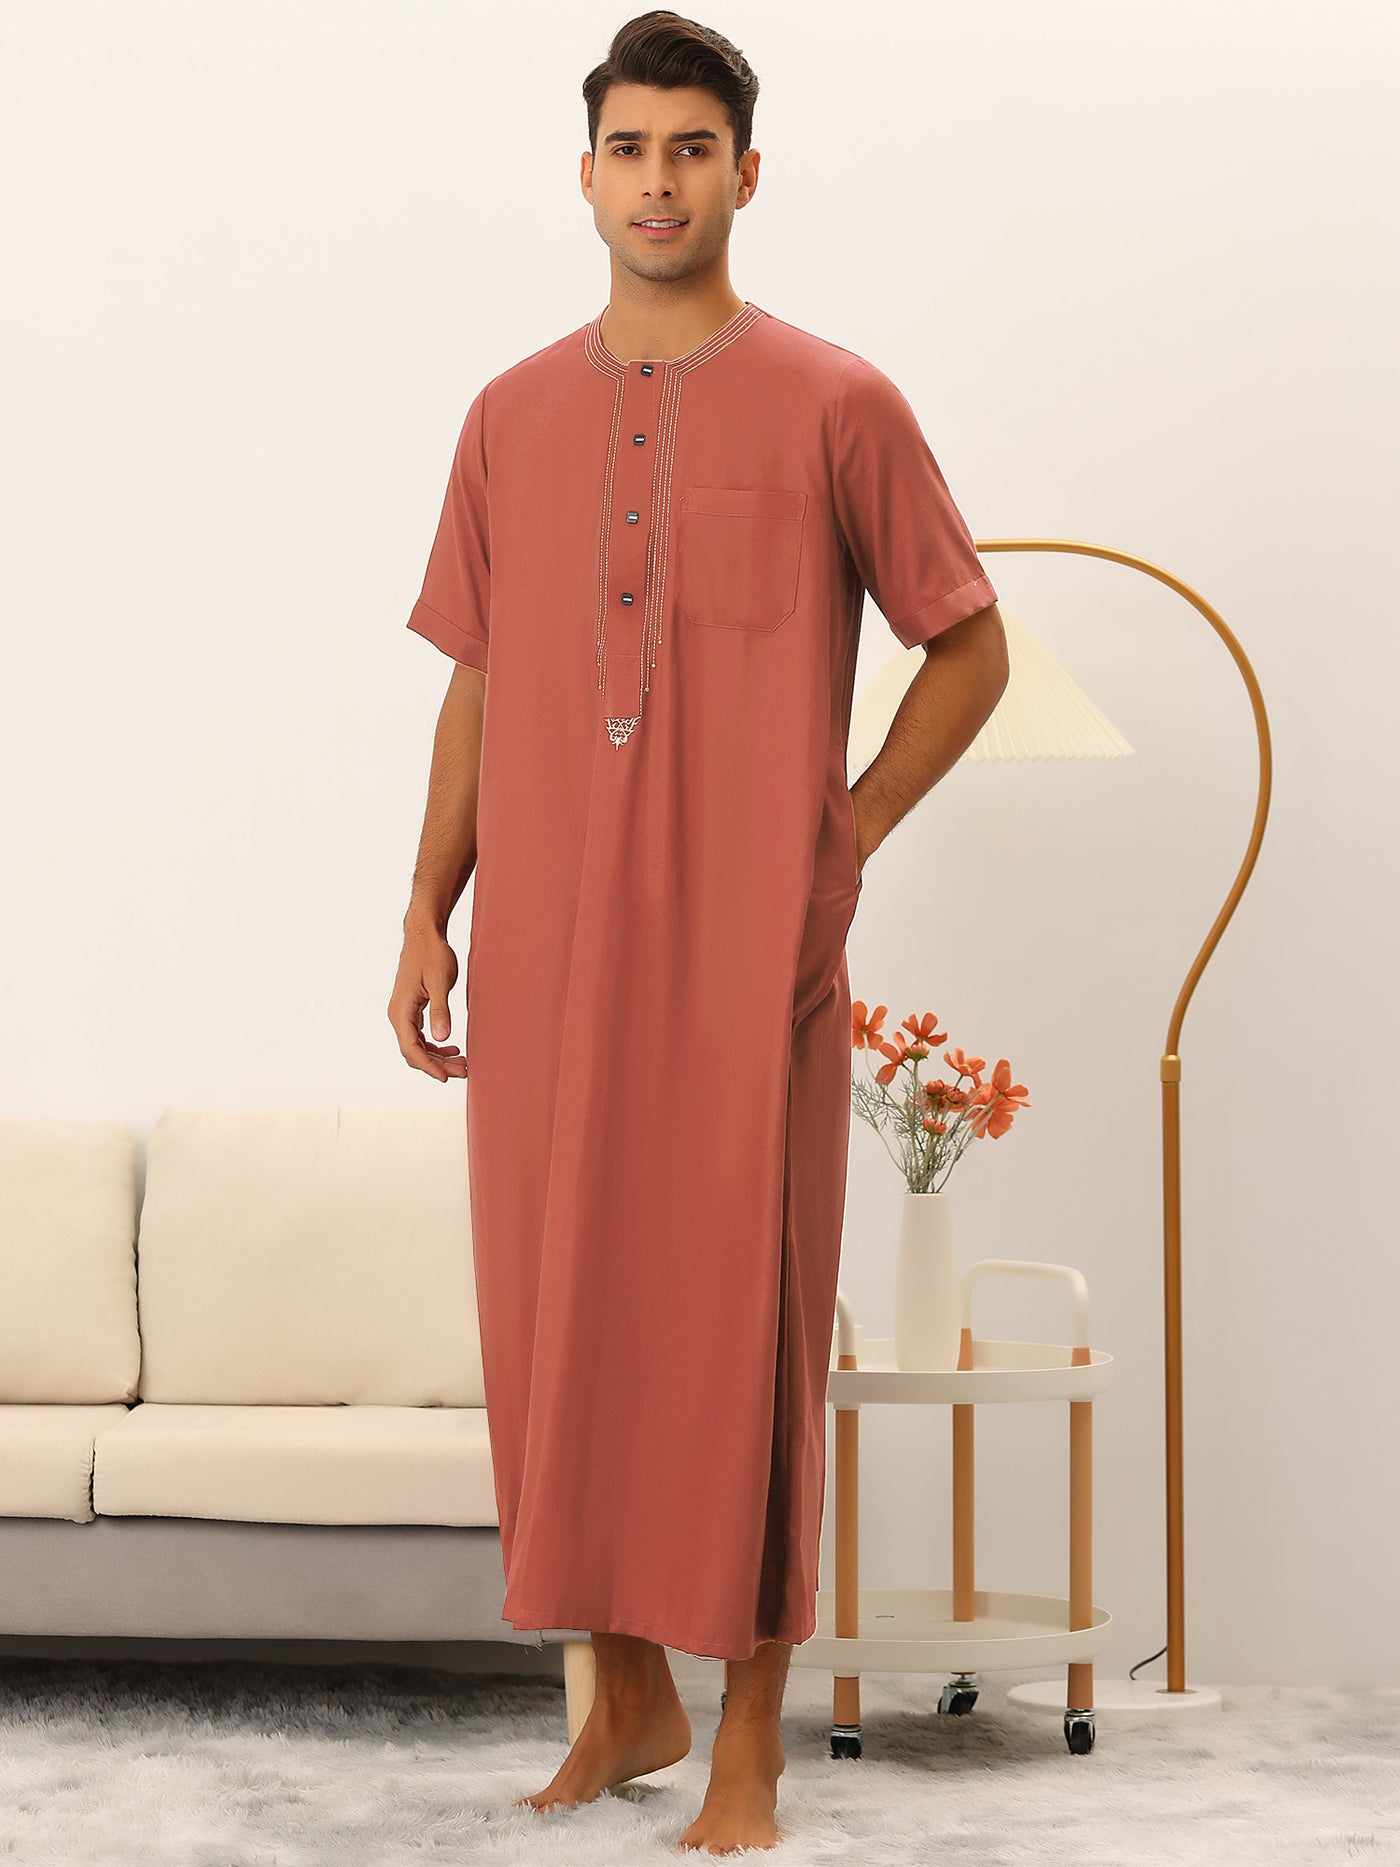 Bublédon Loose Fit Night Gown for Men's Solid Color Short Sleeves Button Pajamas Sleepshirt